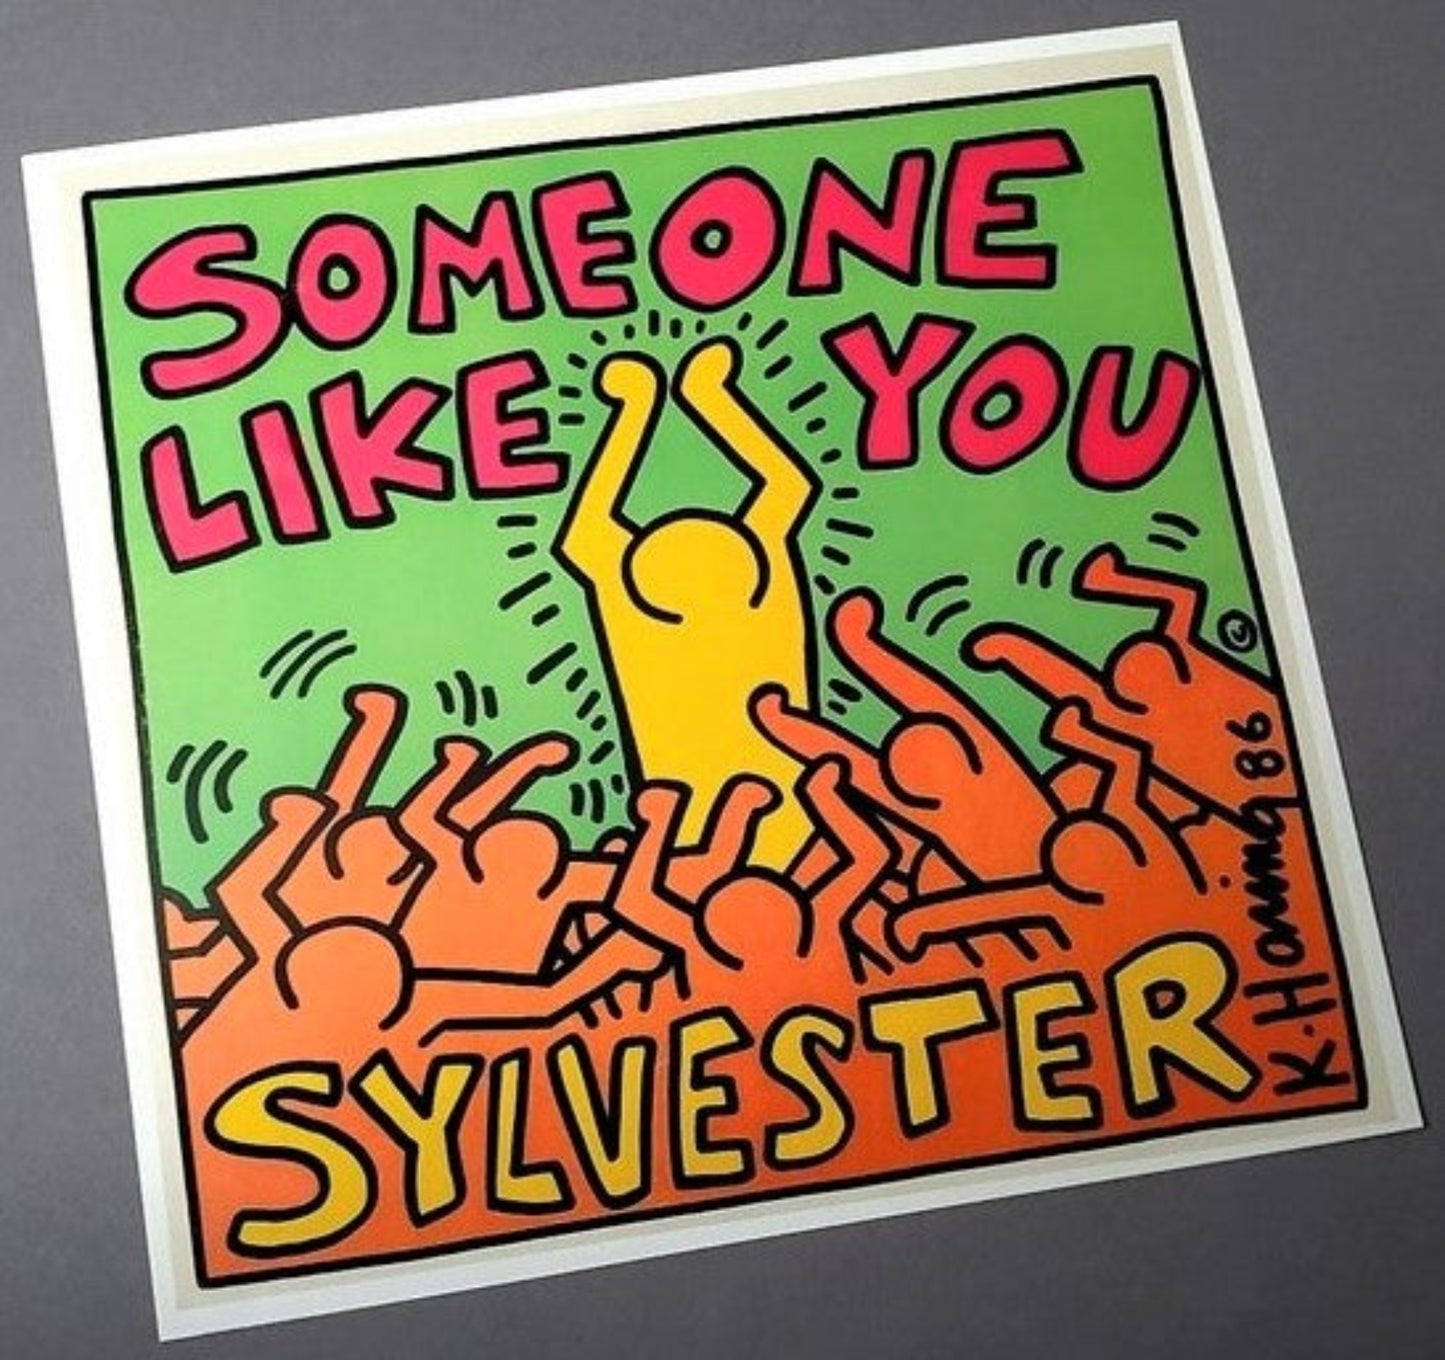 Sylvester Someone Like You Remix  Keith haring Cover Available In AREA51GALLERY New Orleans 